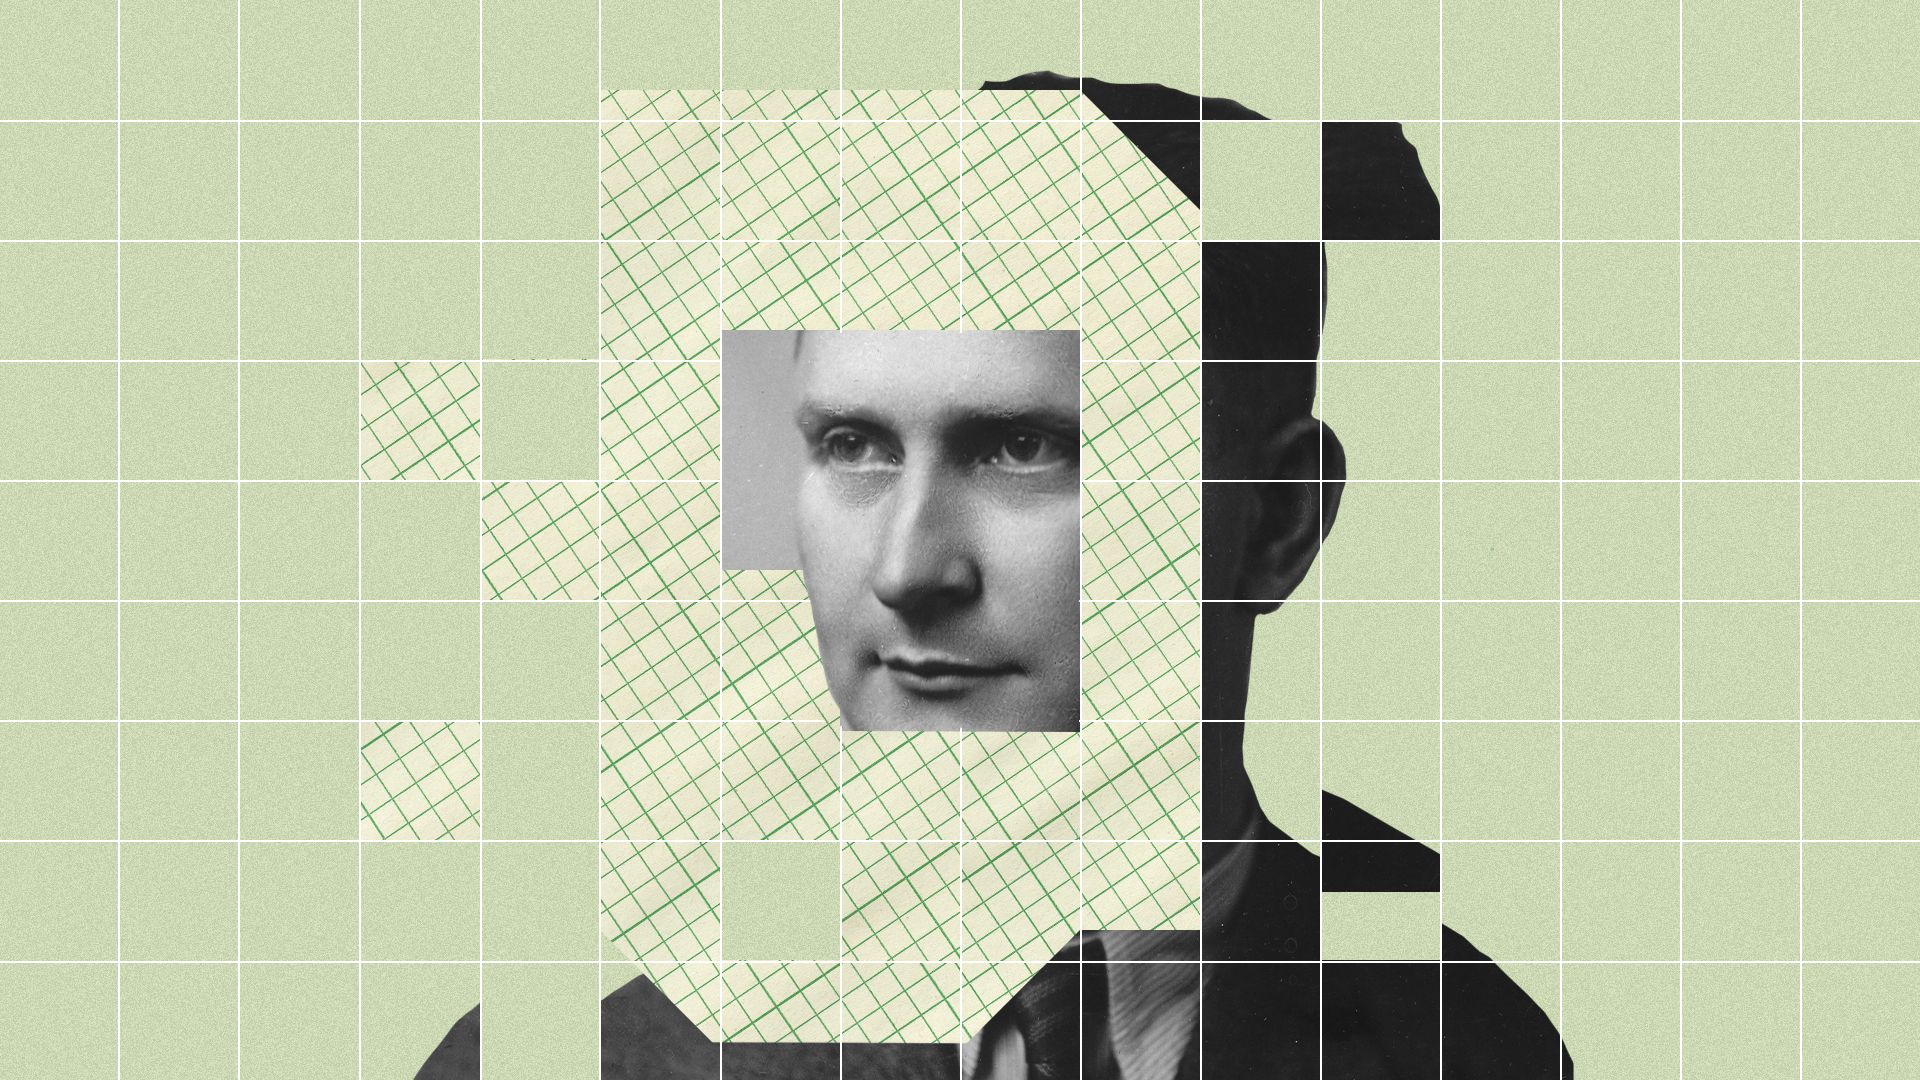 In this illustration, a man's face is cut out into digital blocks.